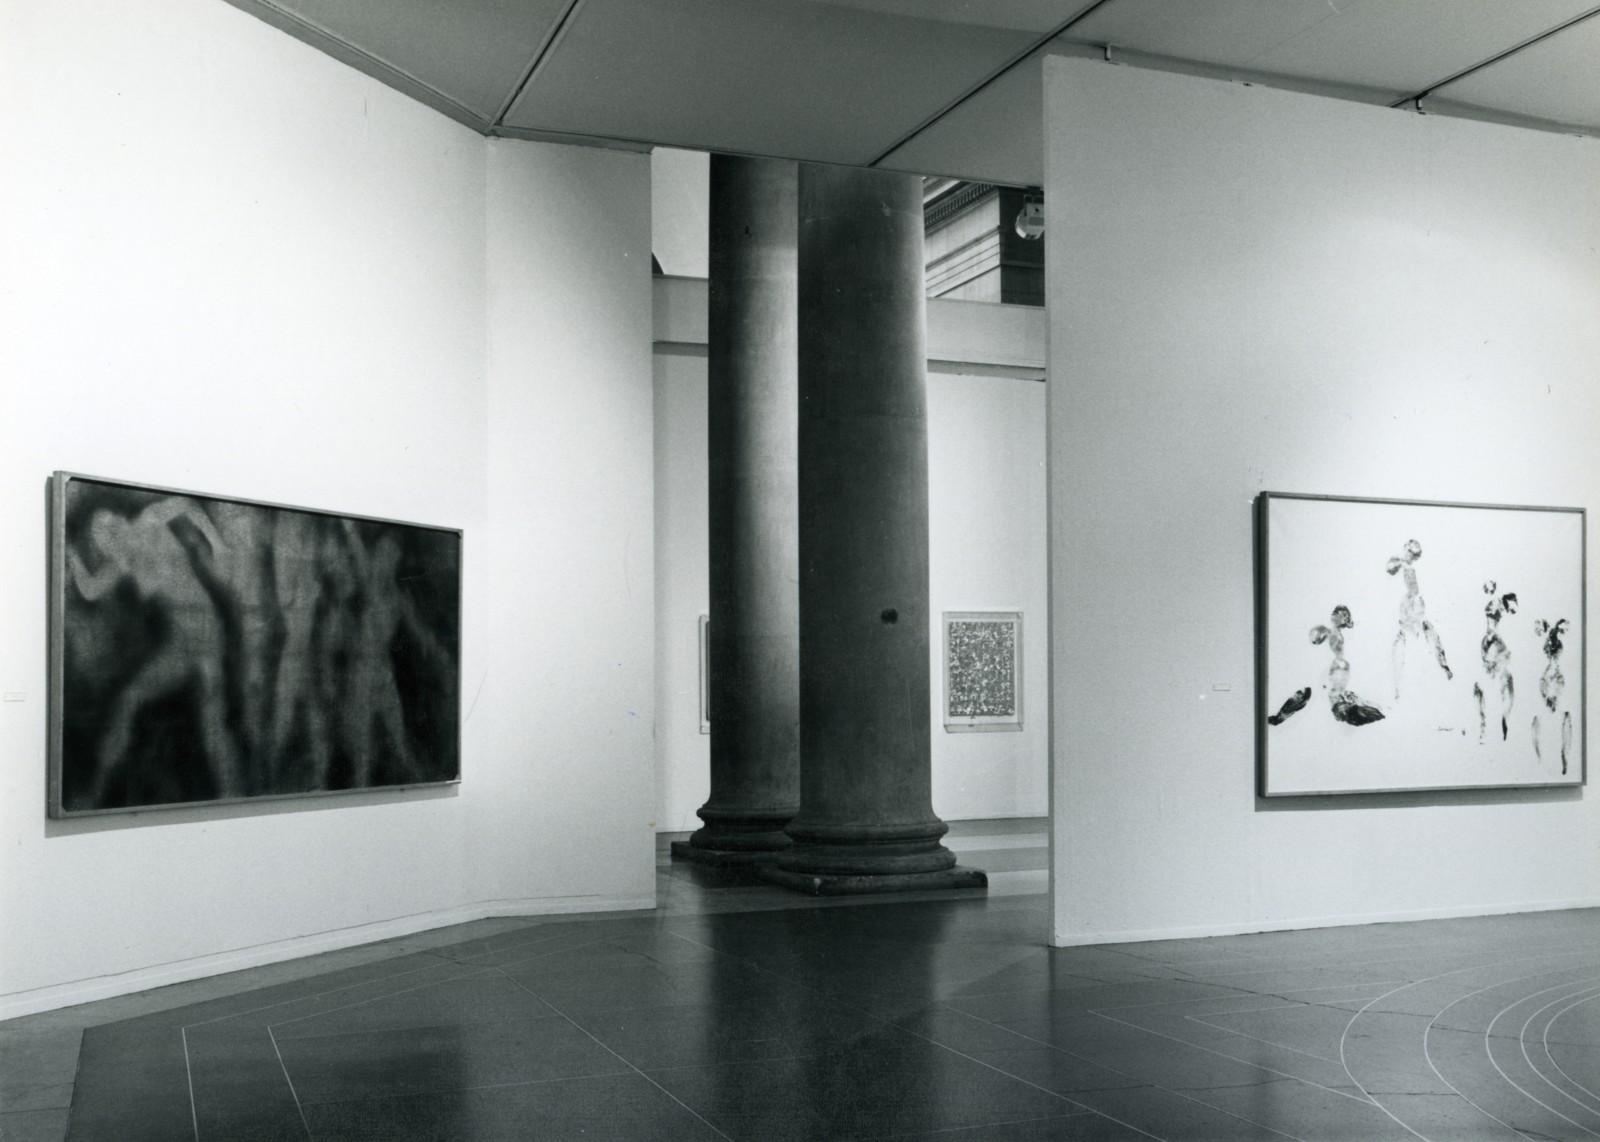 Vue de l'exposition, "Yves Klein, 1928-1962 : Selected writings", Tate Gallery, 1974